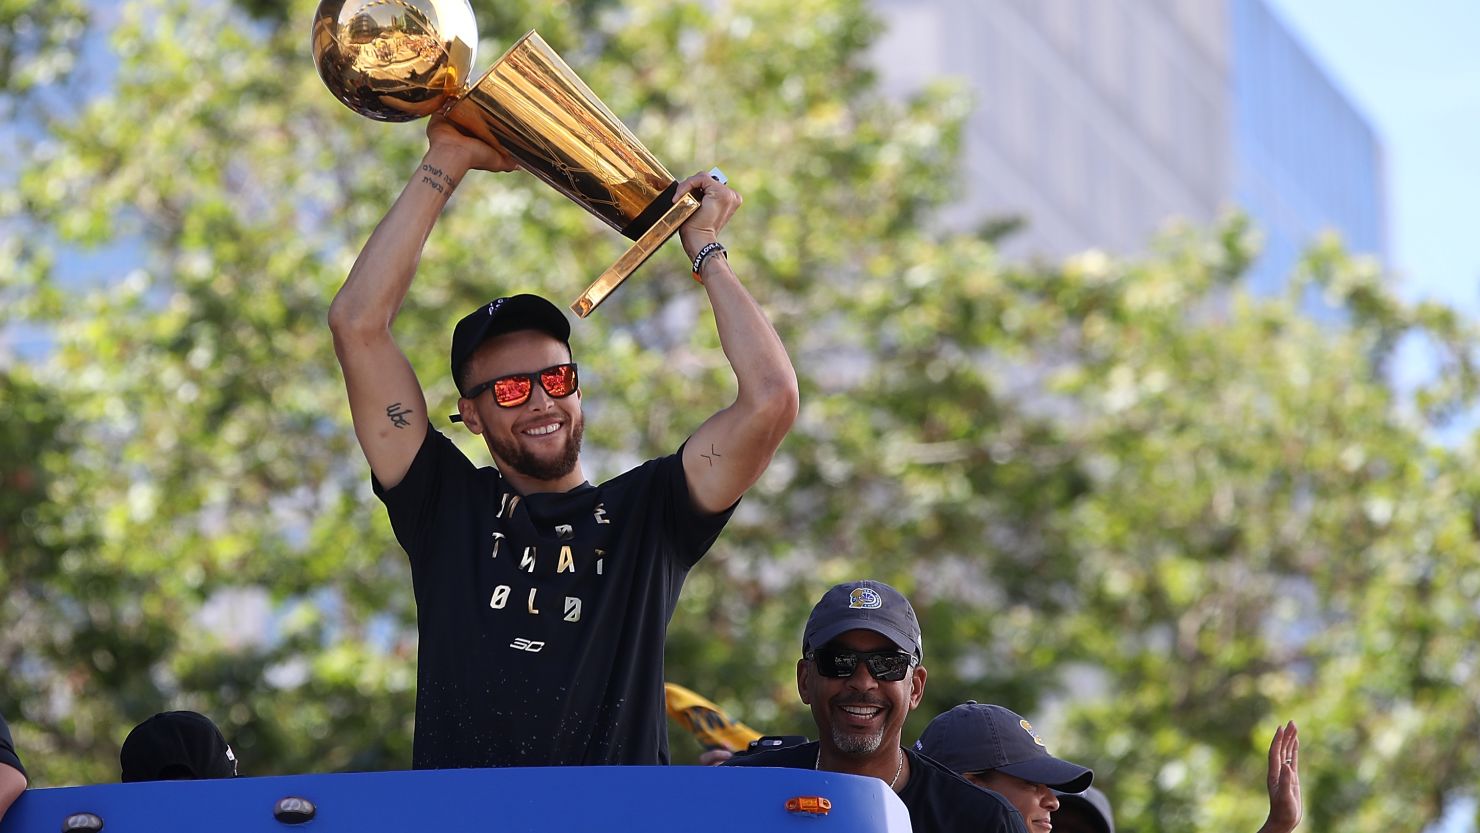 Steph Curry holds the Larry O'Brien NBA Championship Trophy aloft during a victory parade in Oakland, California.